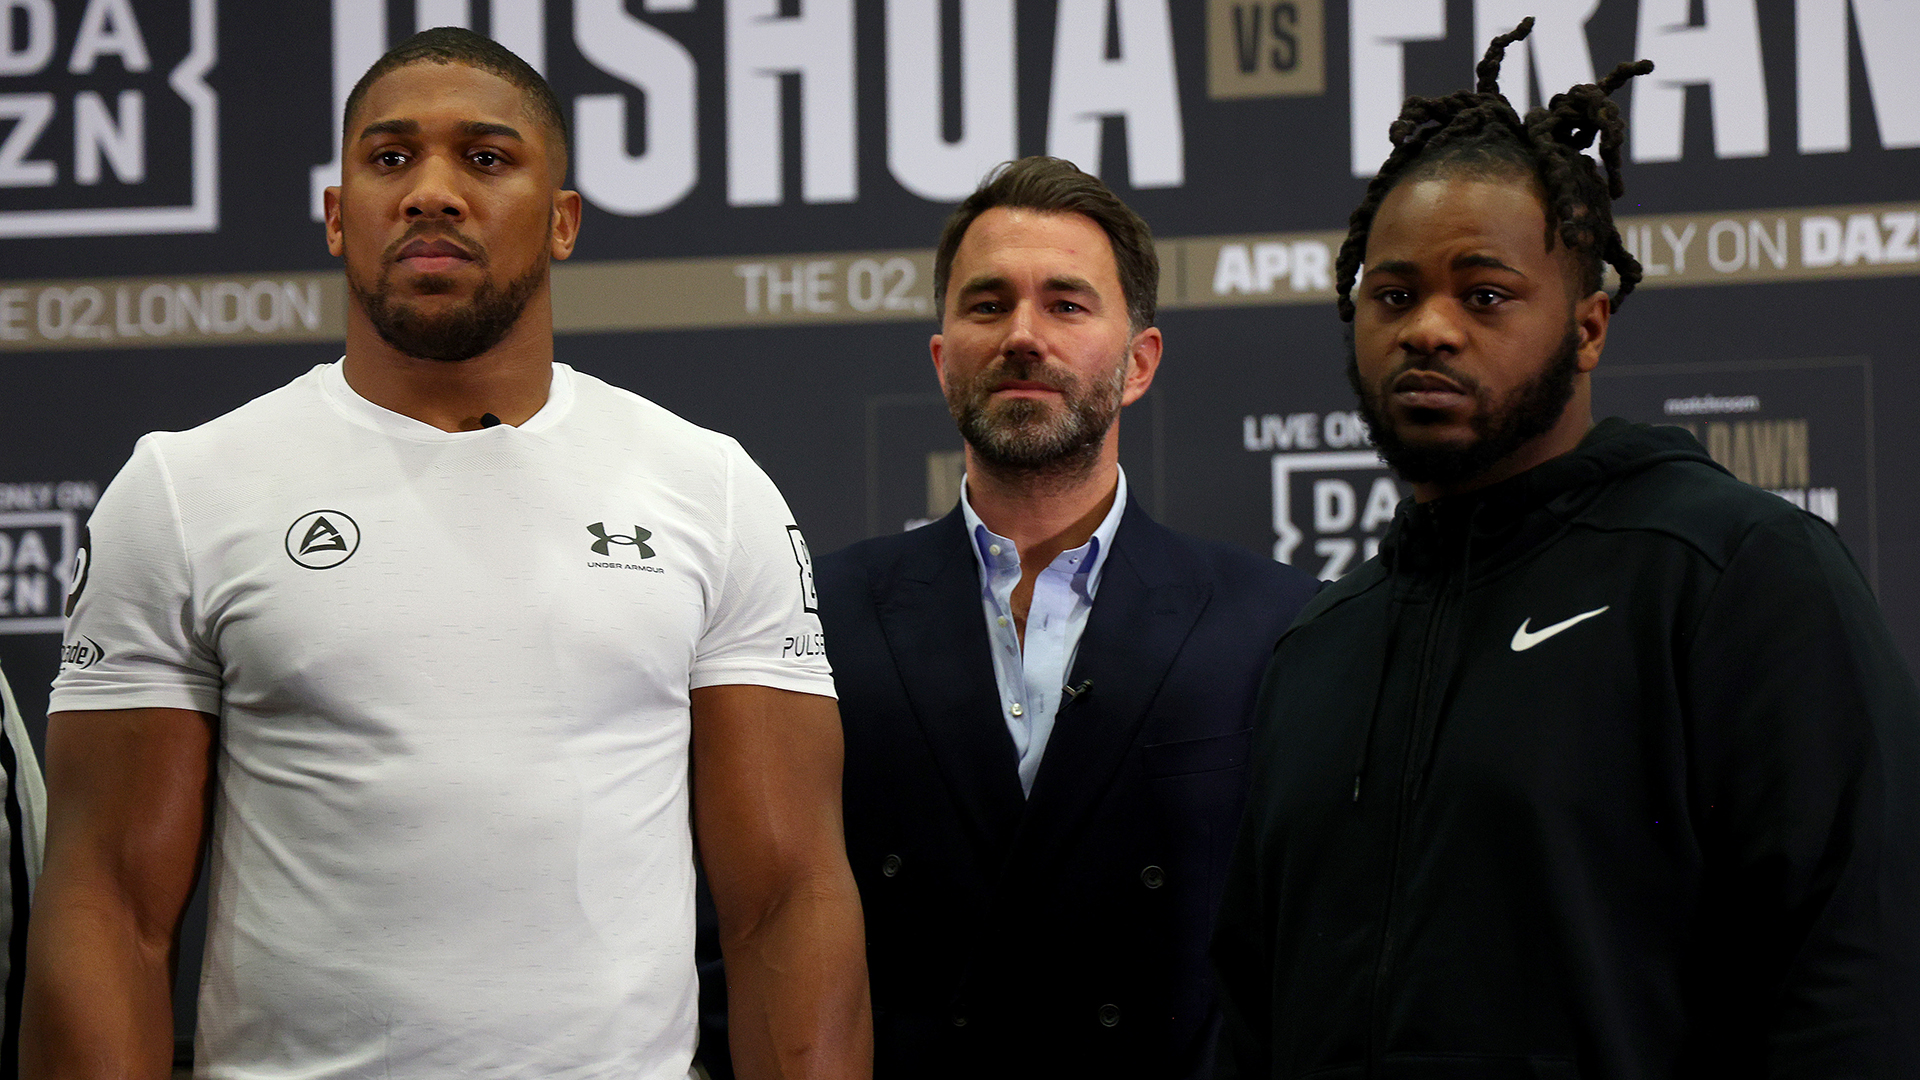 Anthony Joshua v Jermaine Franklin Heavyweight fight to be screened on DAZNs new TV channel on April 1